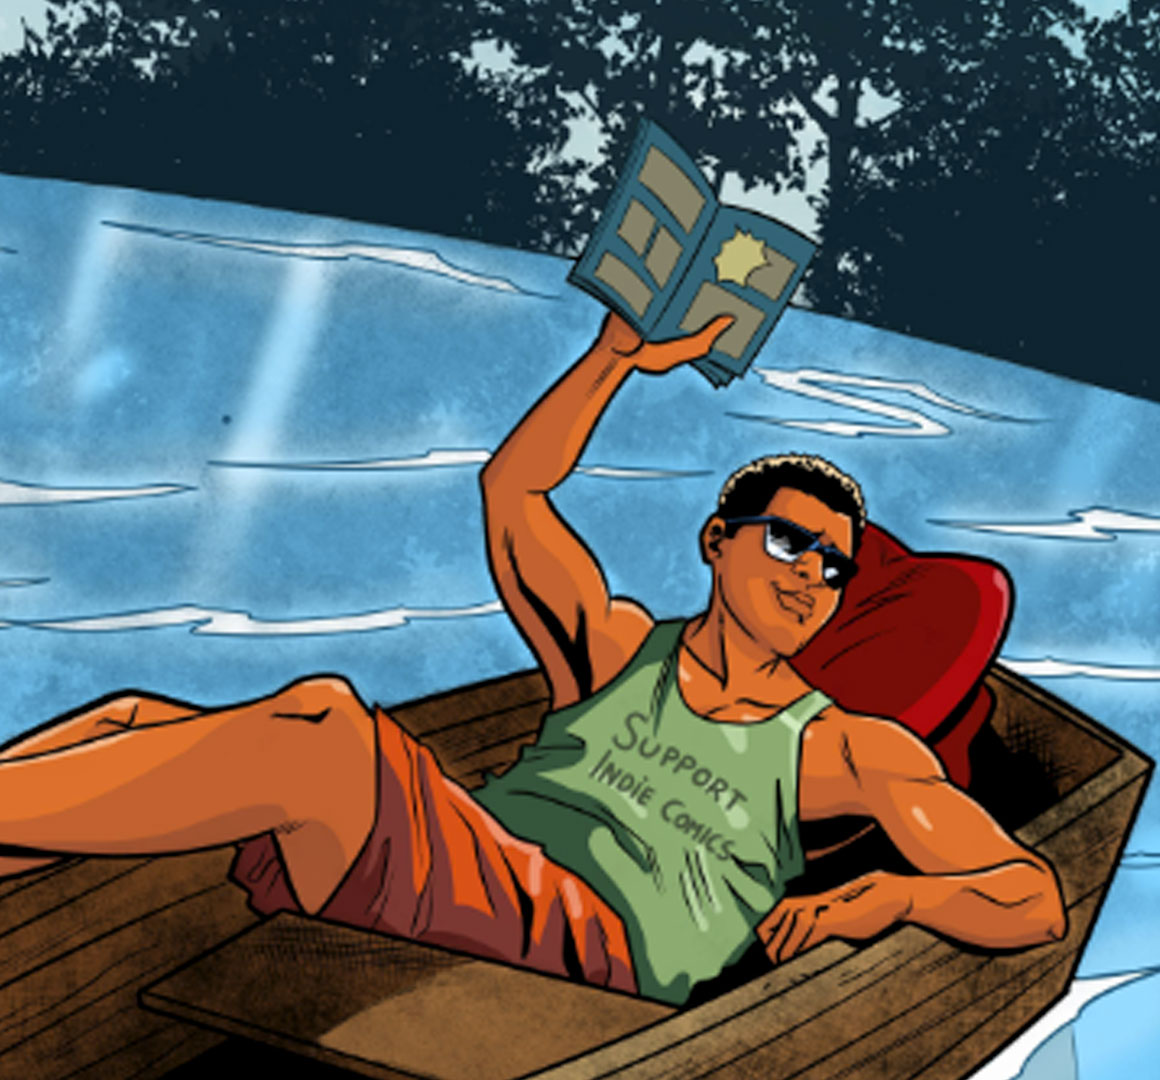 Illustration of a man on the water in a boat holding a comic book wearing a "Support Indie Comic" tank top.